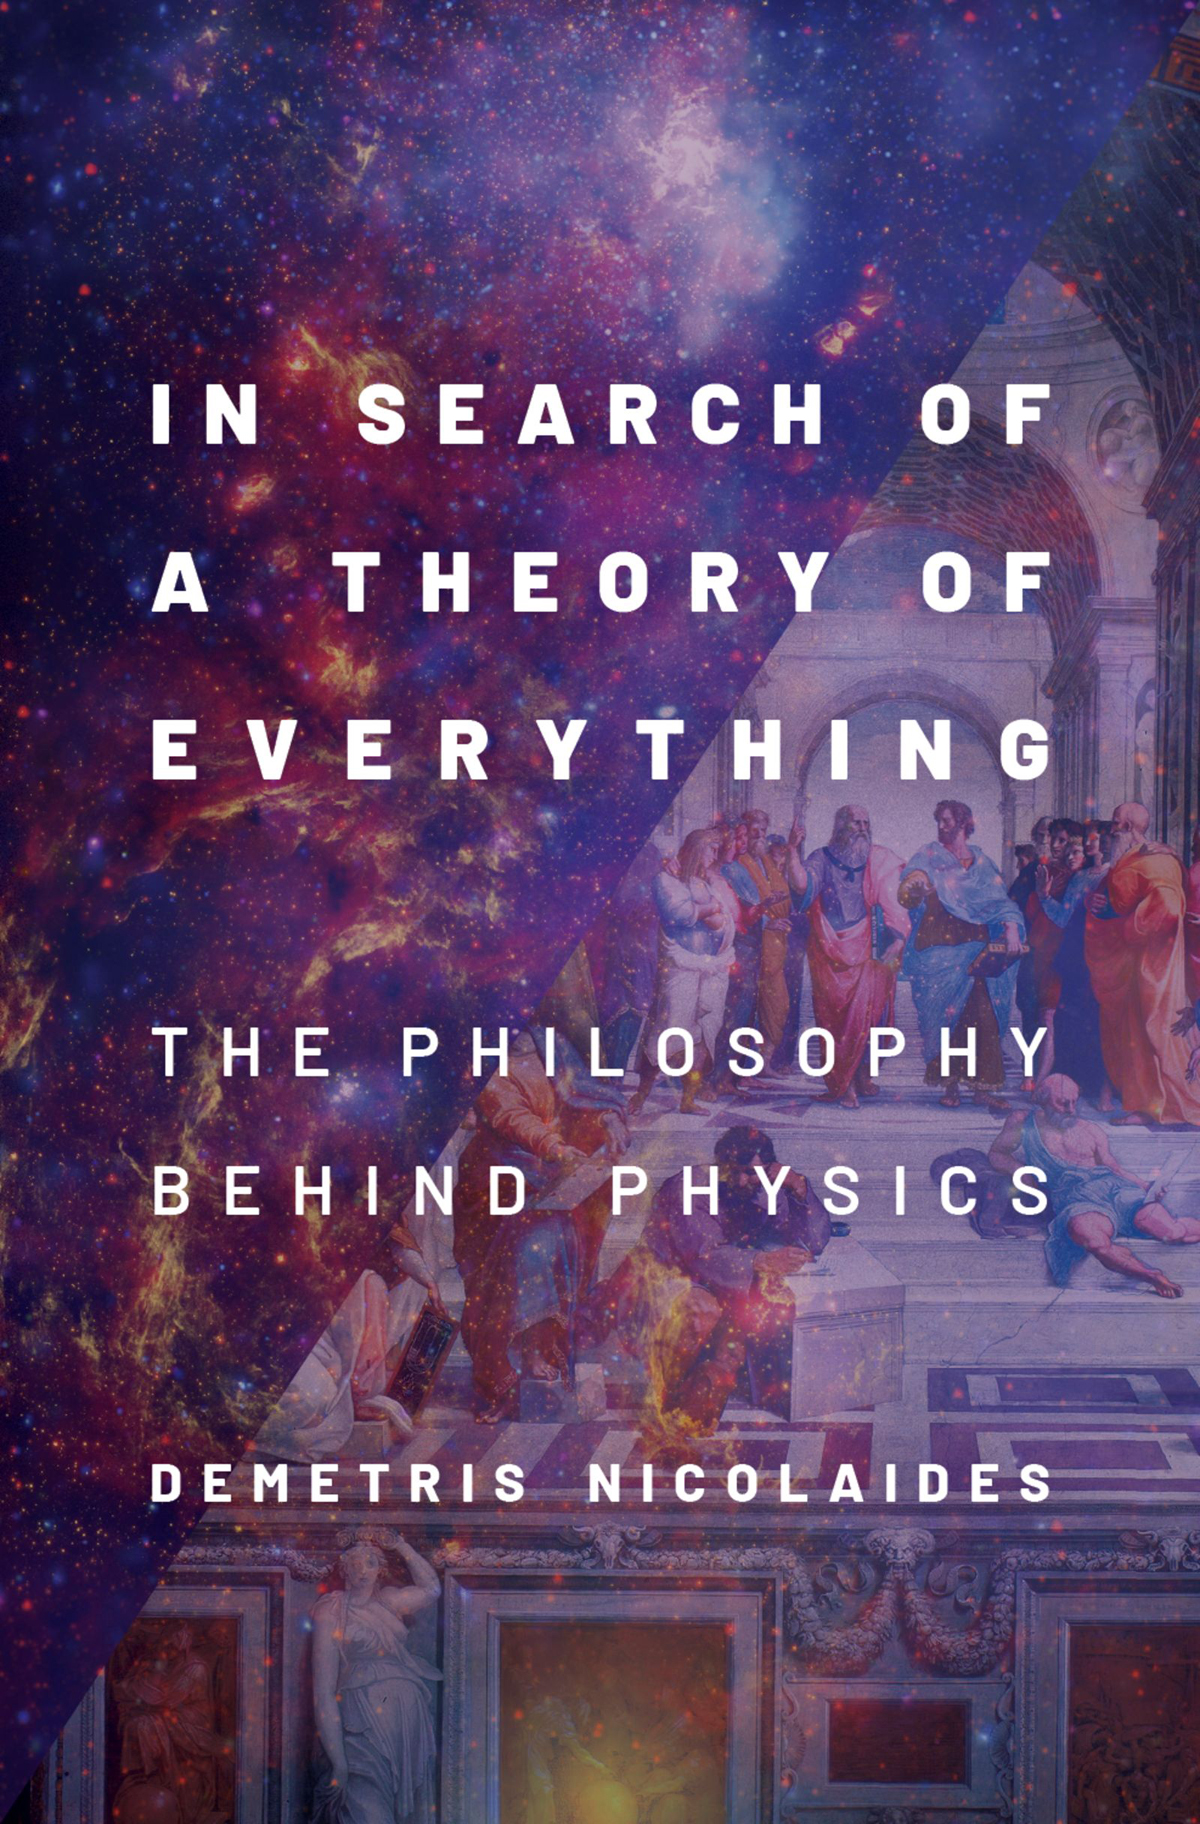 In Search of a Theory of Everything The Philosophy Behind Physics - image 1